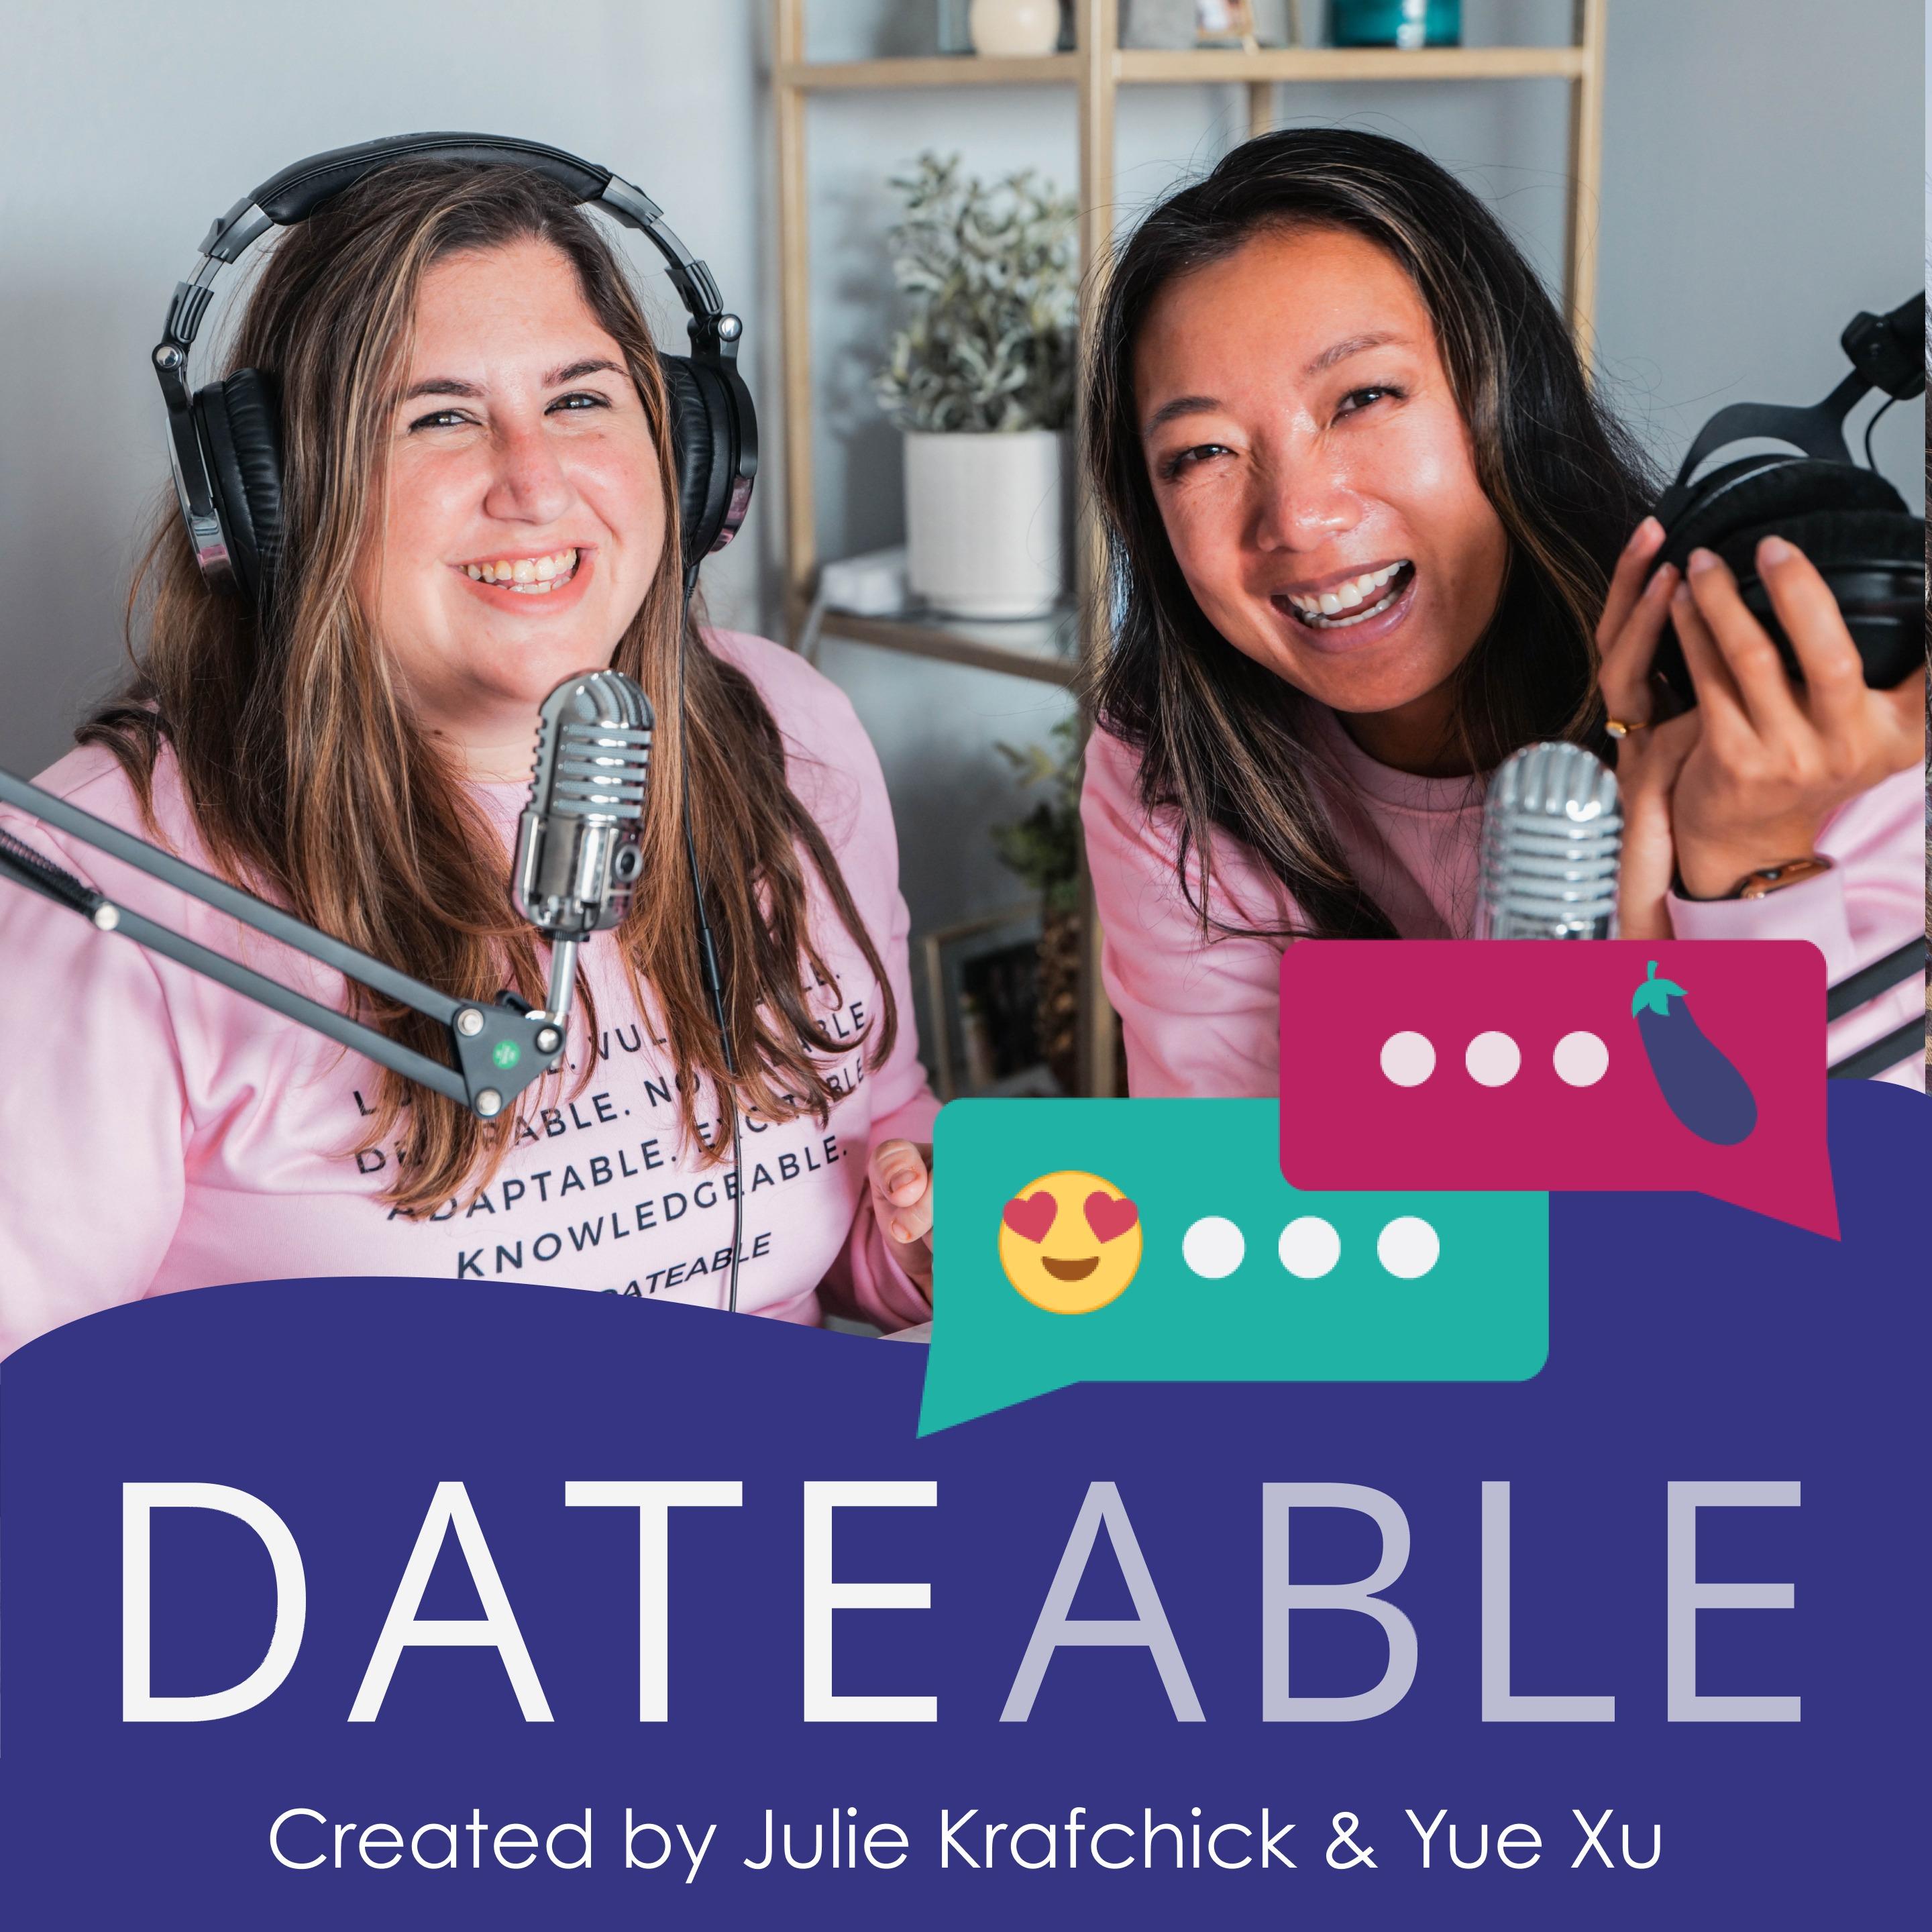 Dateable: Your insider's look into modern dating